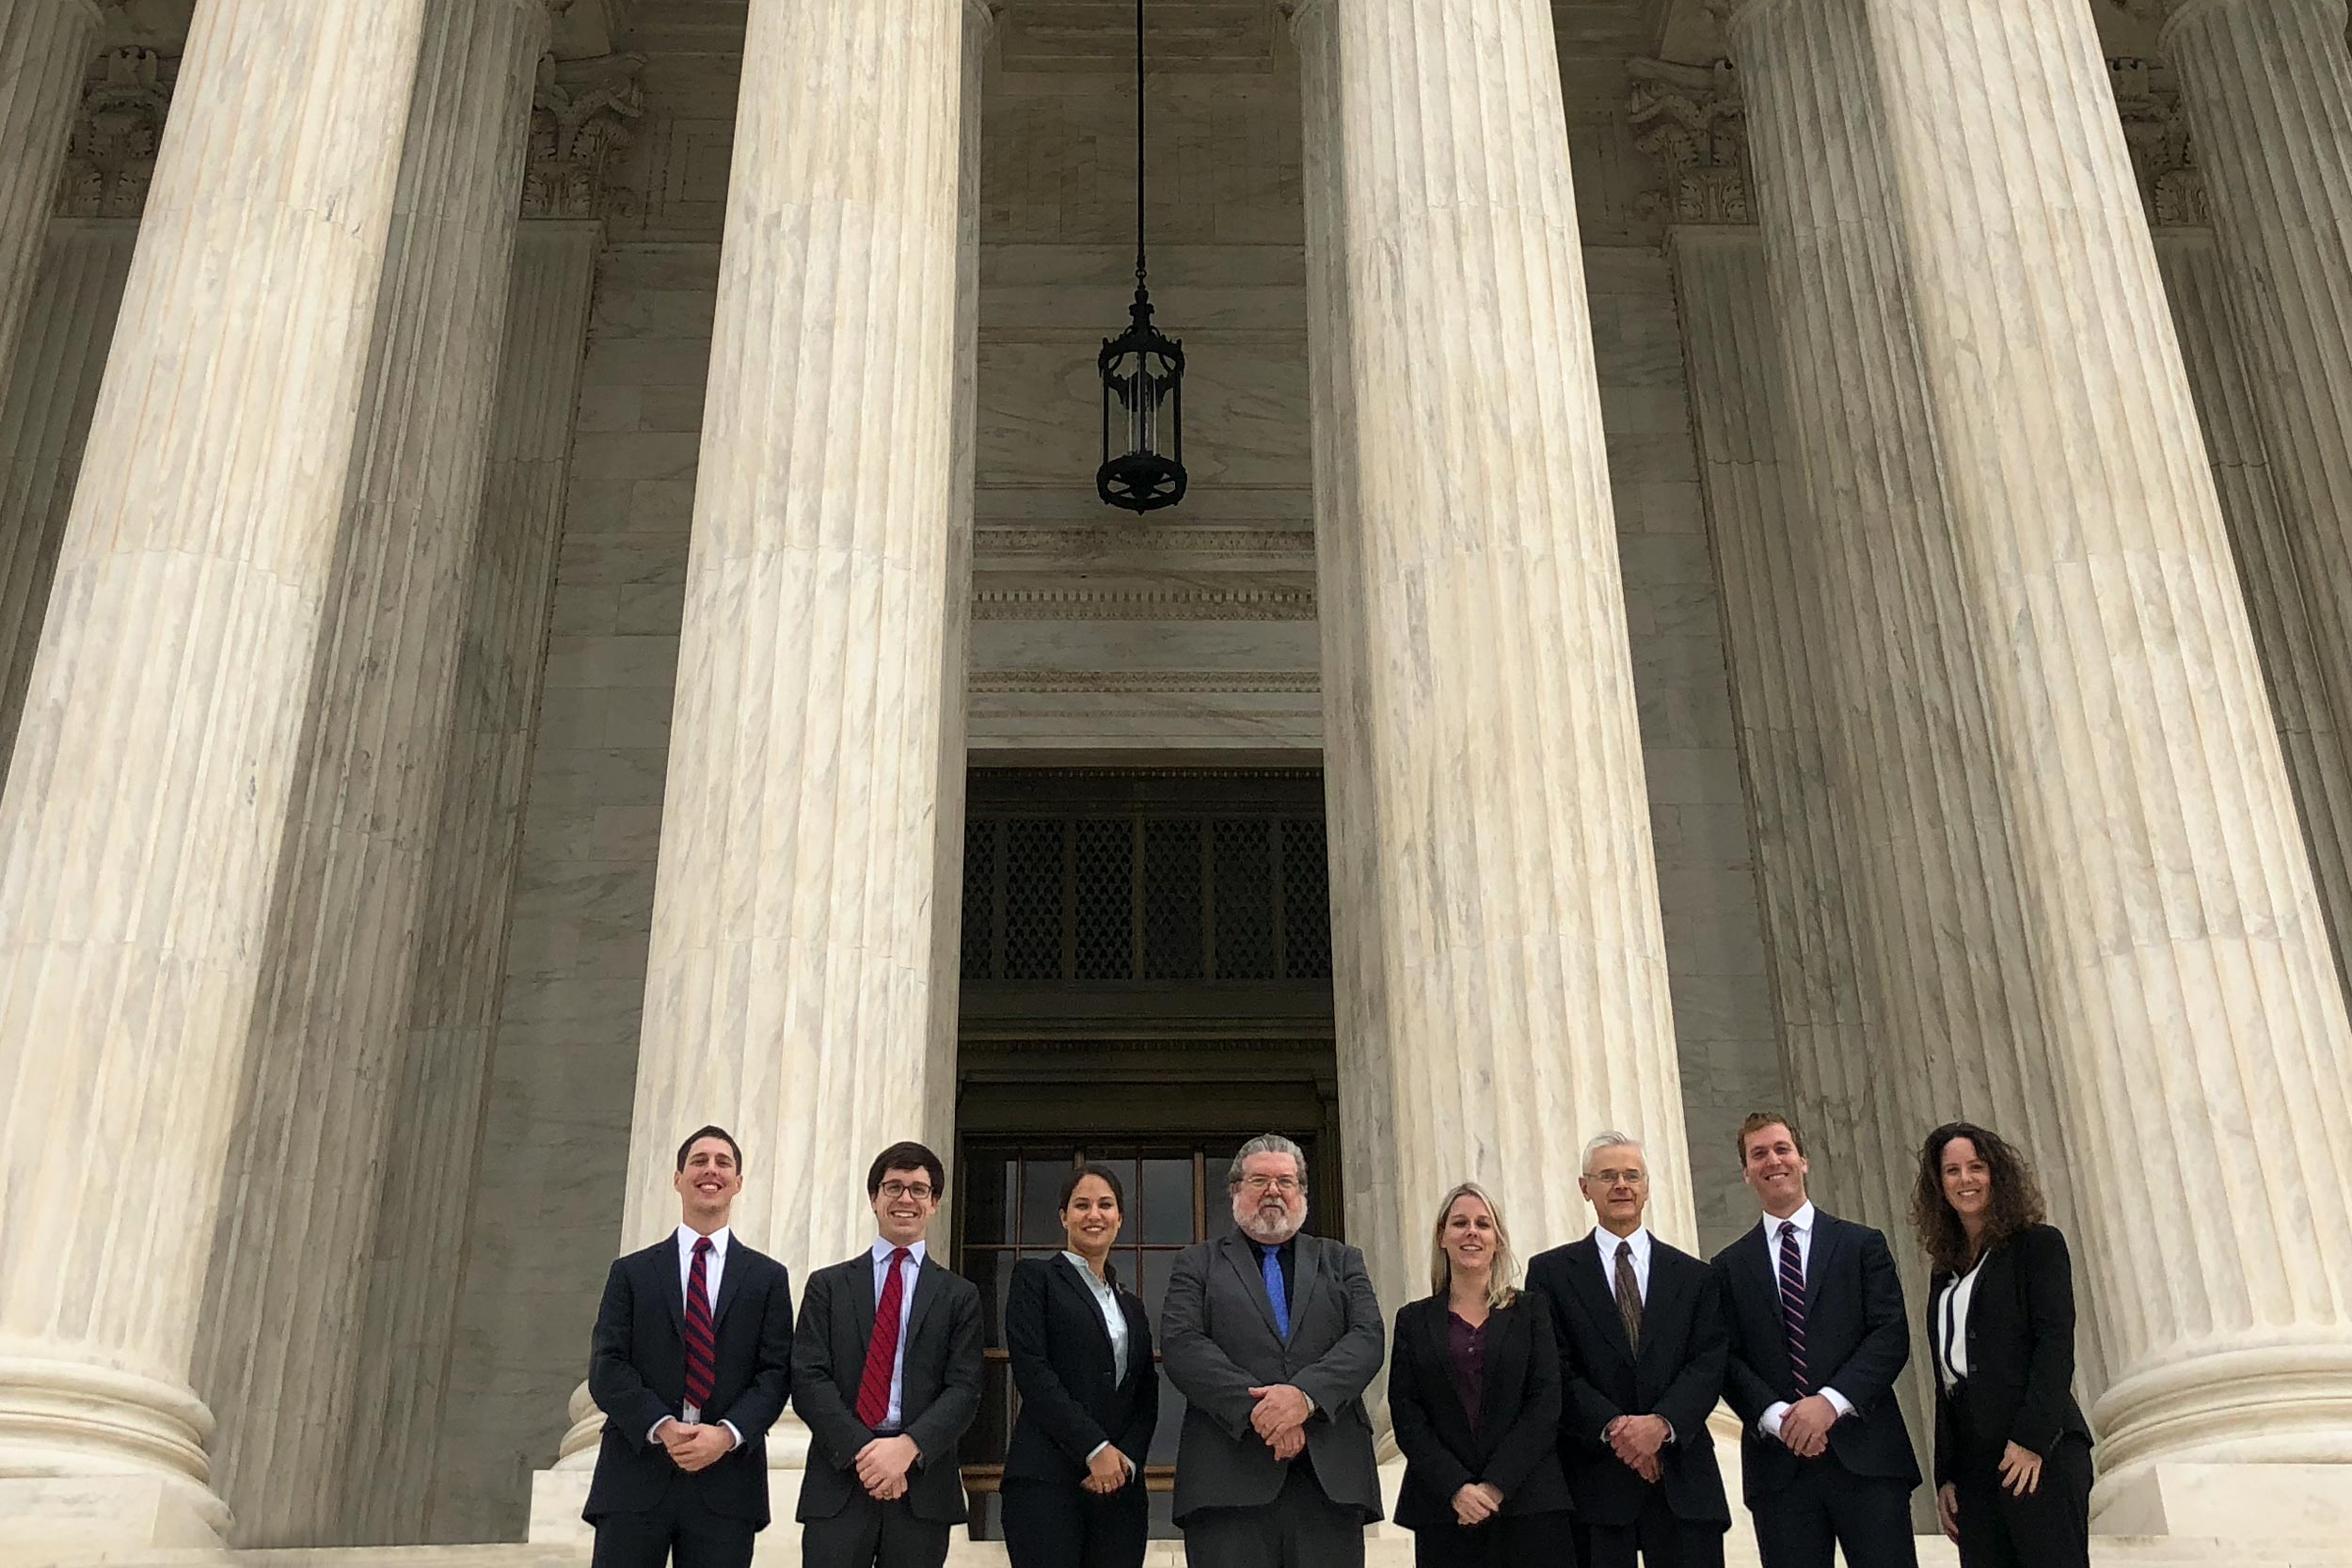 Members of UVA Law’s Supreme Court Litigation Clinic pose together on the Steps of the US Supreme Court